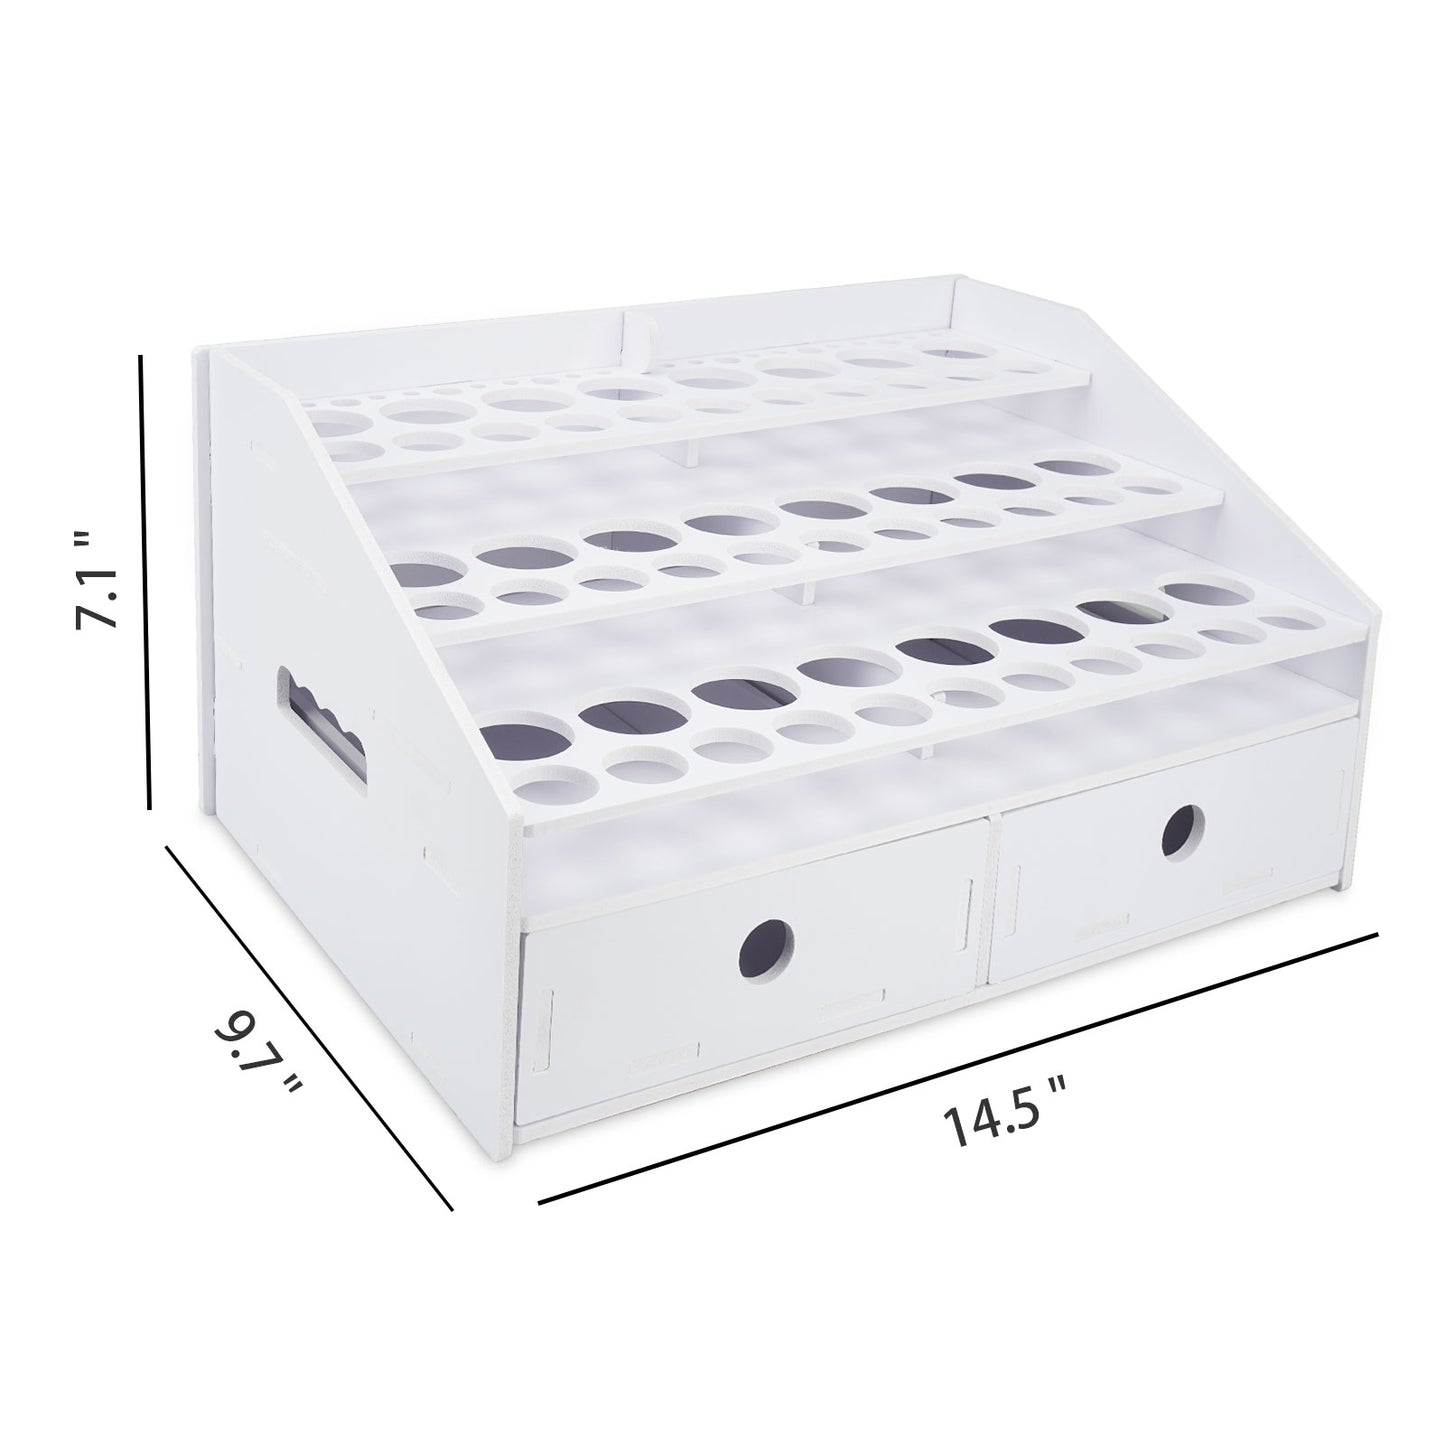 57 Holes Paint Bottles Storage Rack with Cabinet